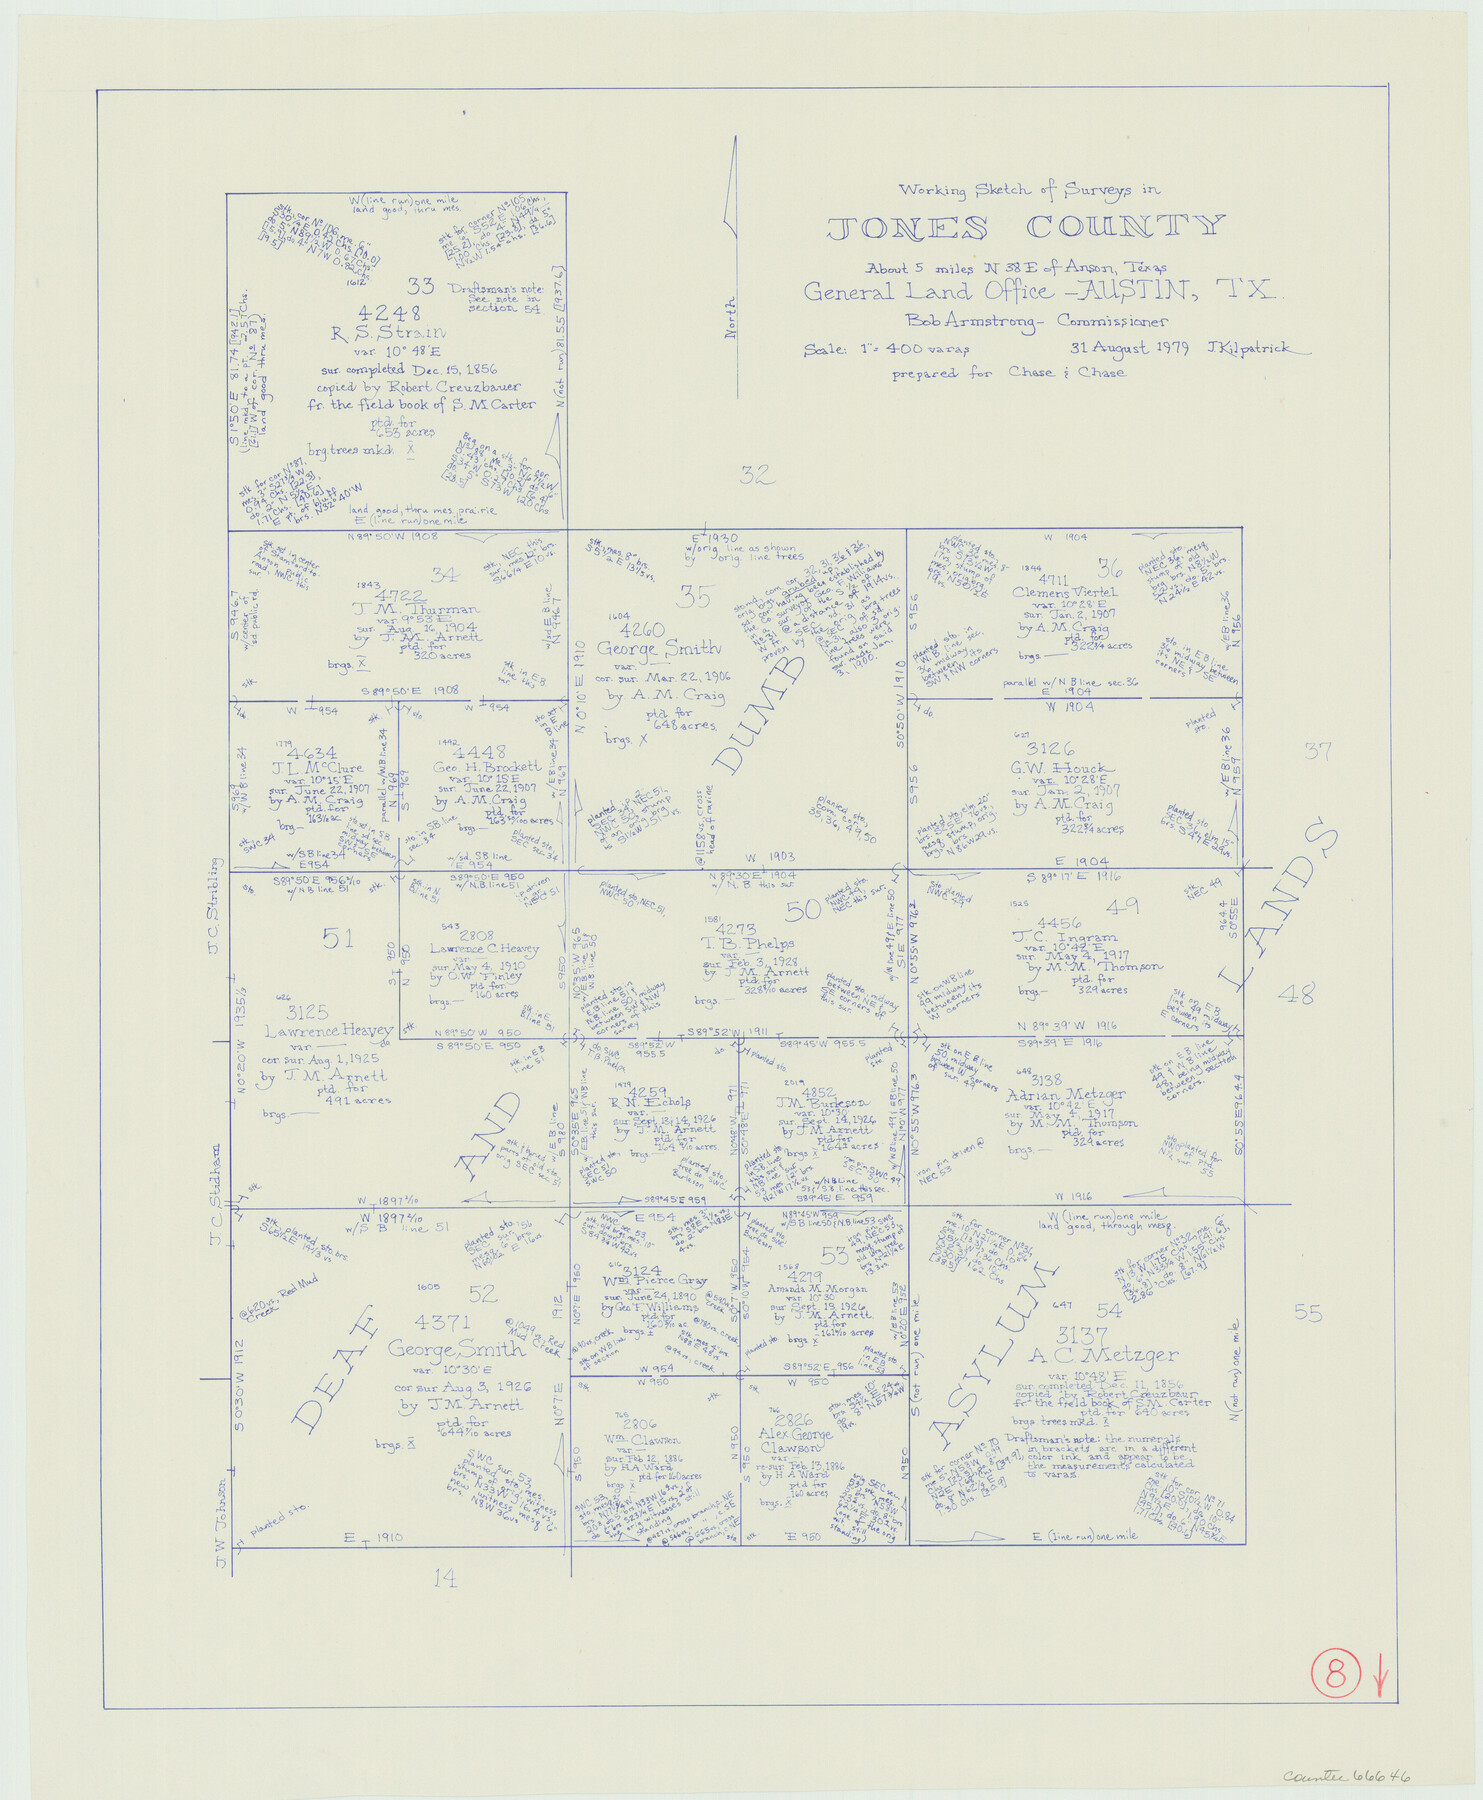 66646, Jones County Working Sketch 8, General Map Collection